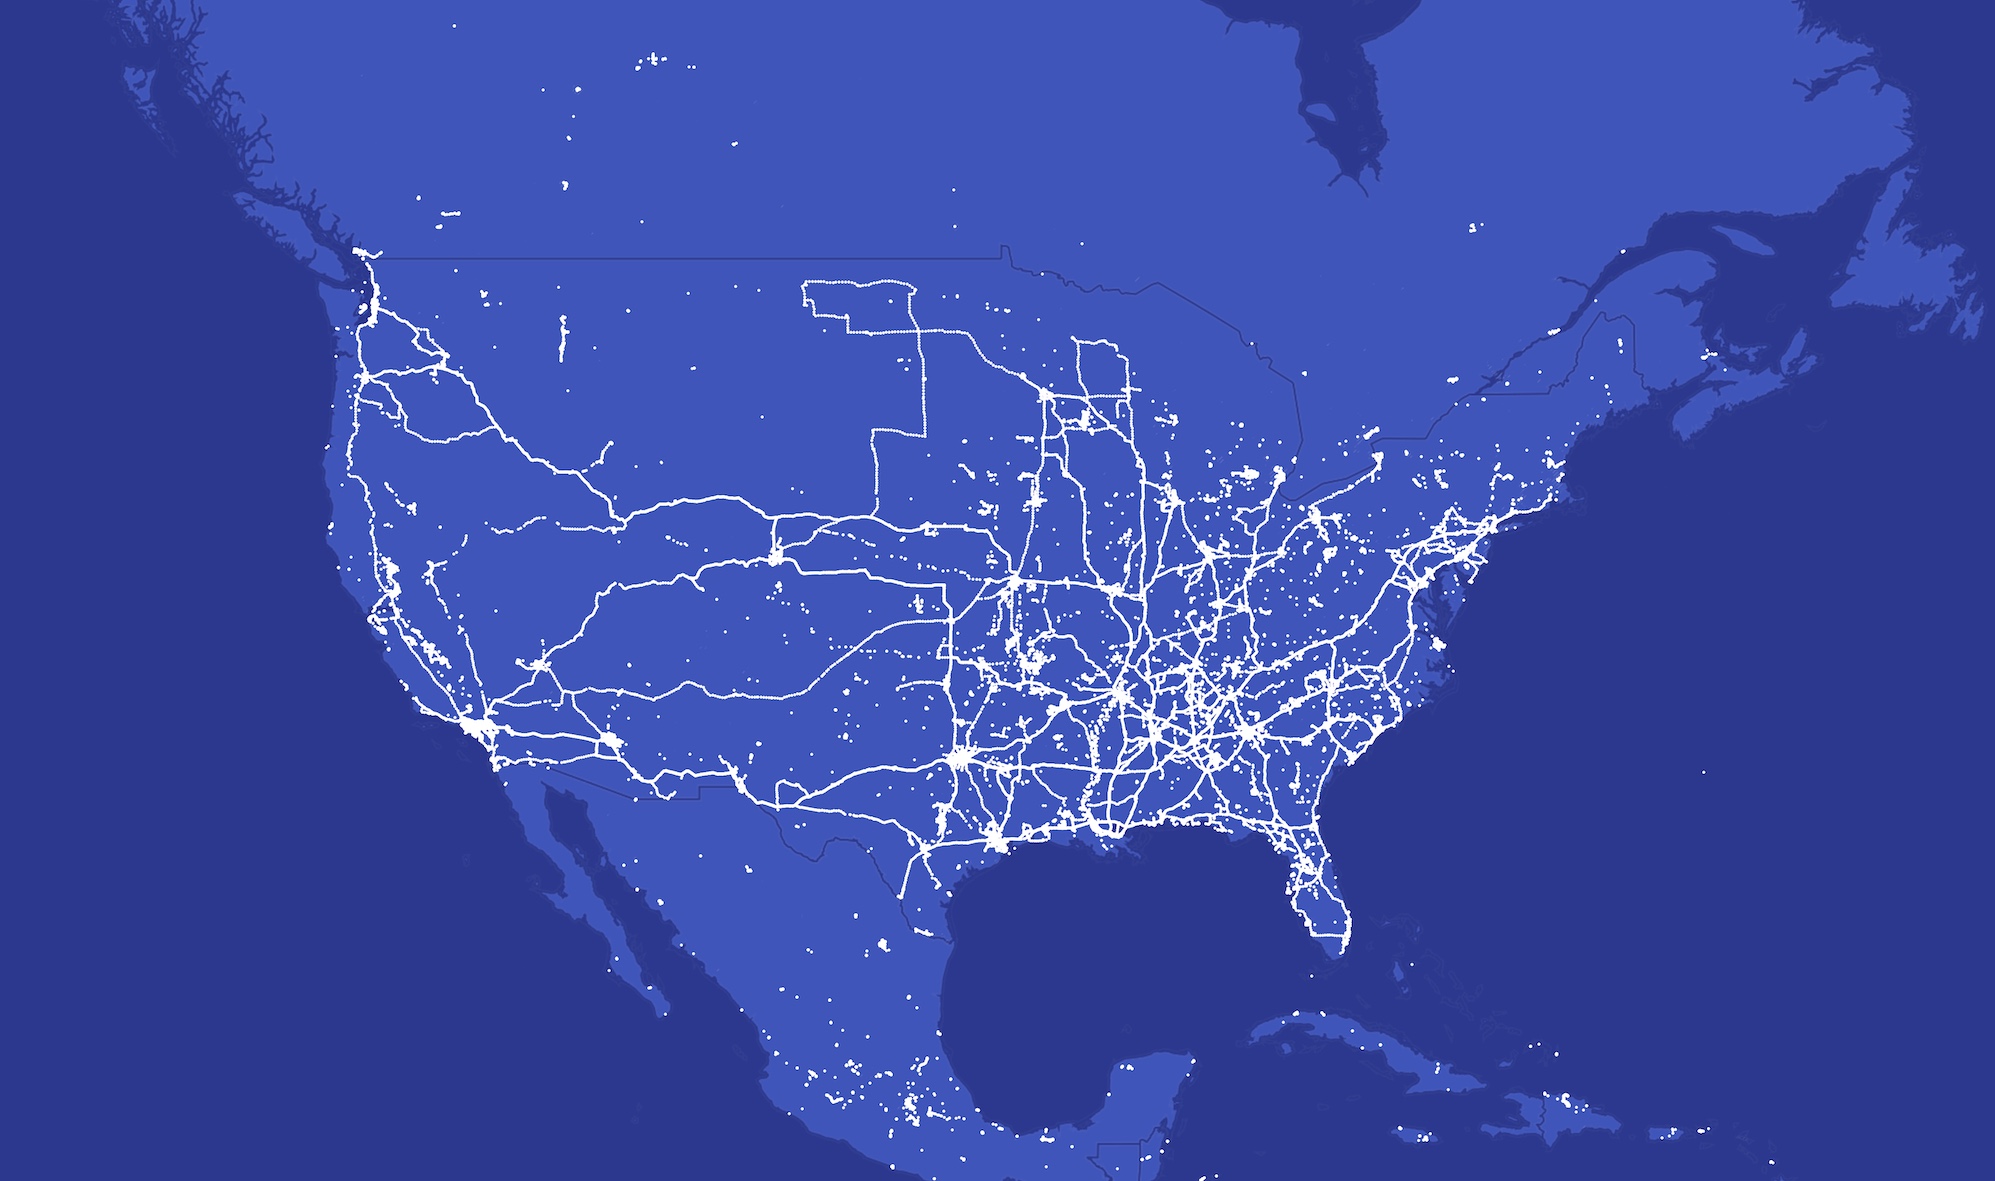 Millions of location data points visualized on a blue map of the United States